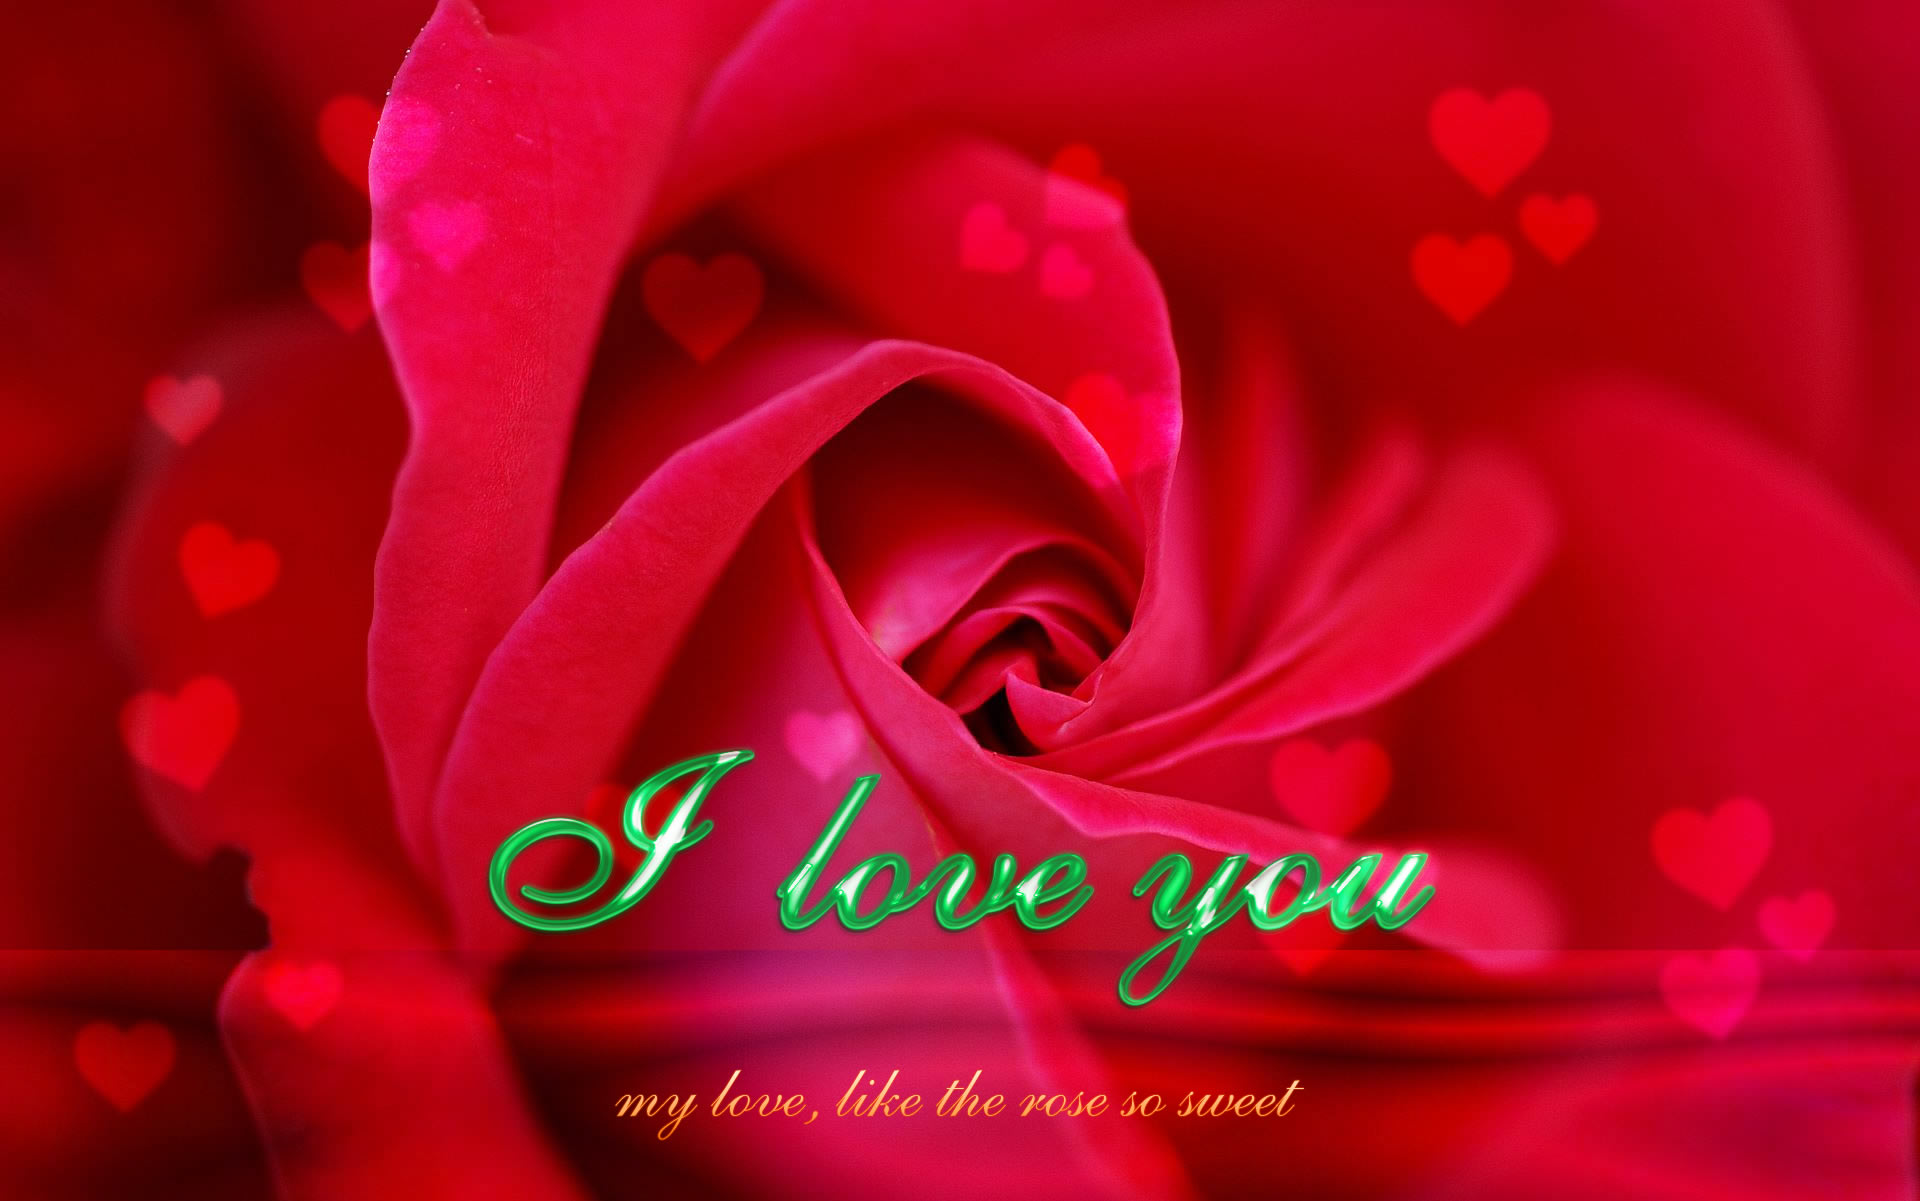 Red Roses Wallpapers HD A39 i love you